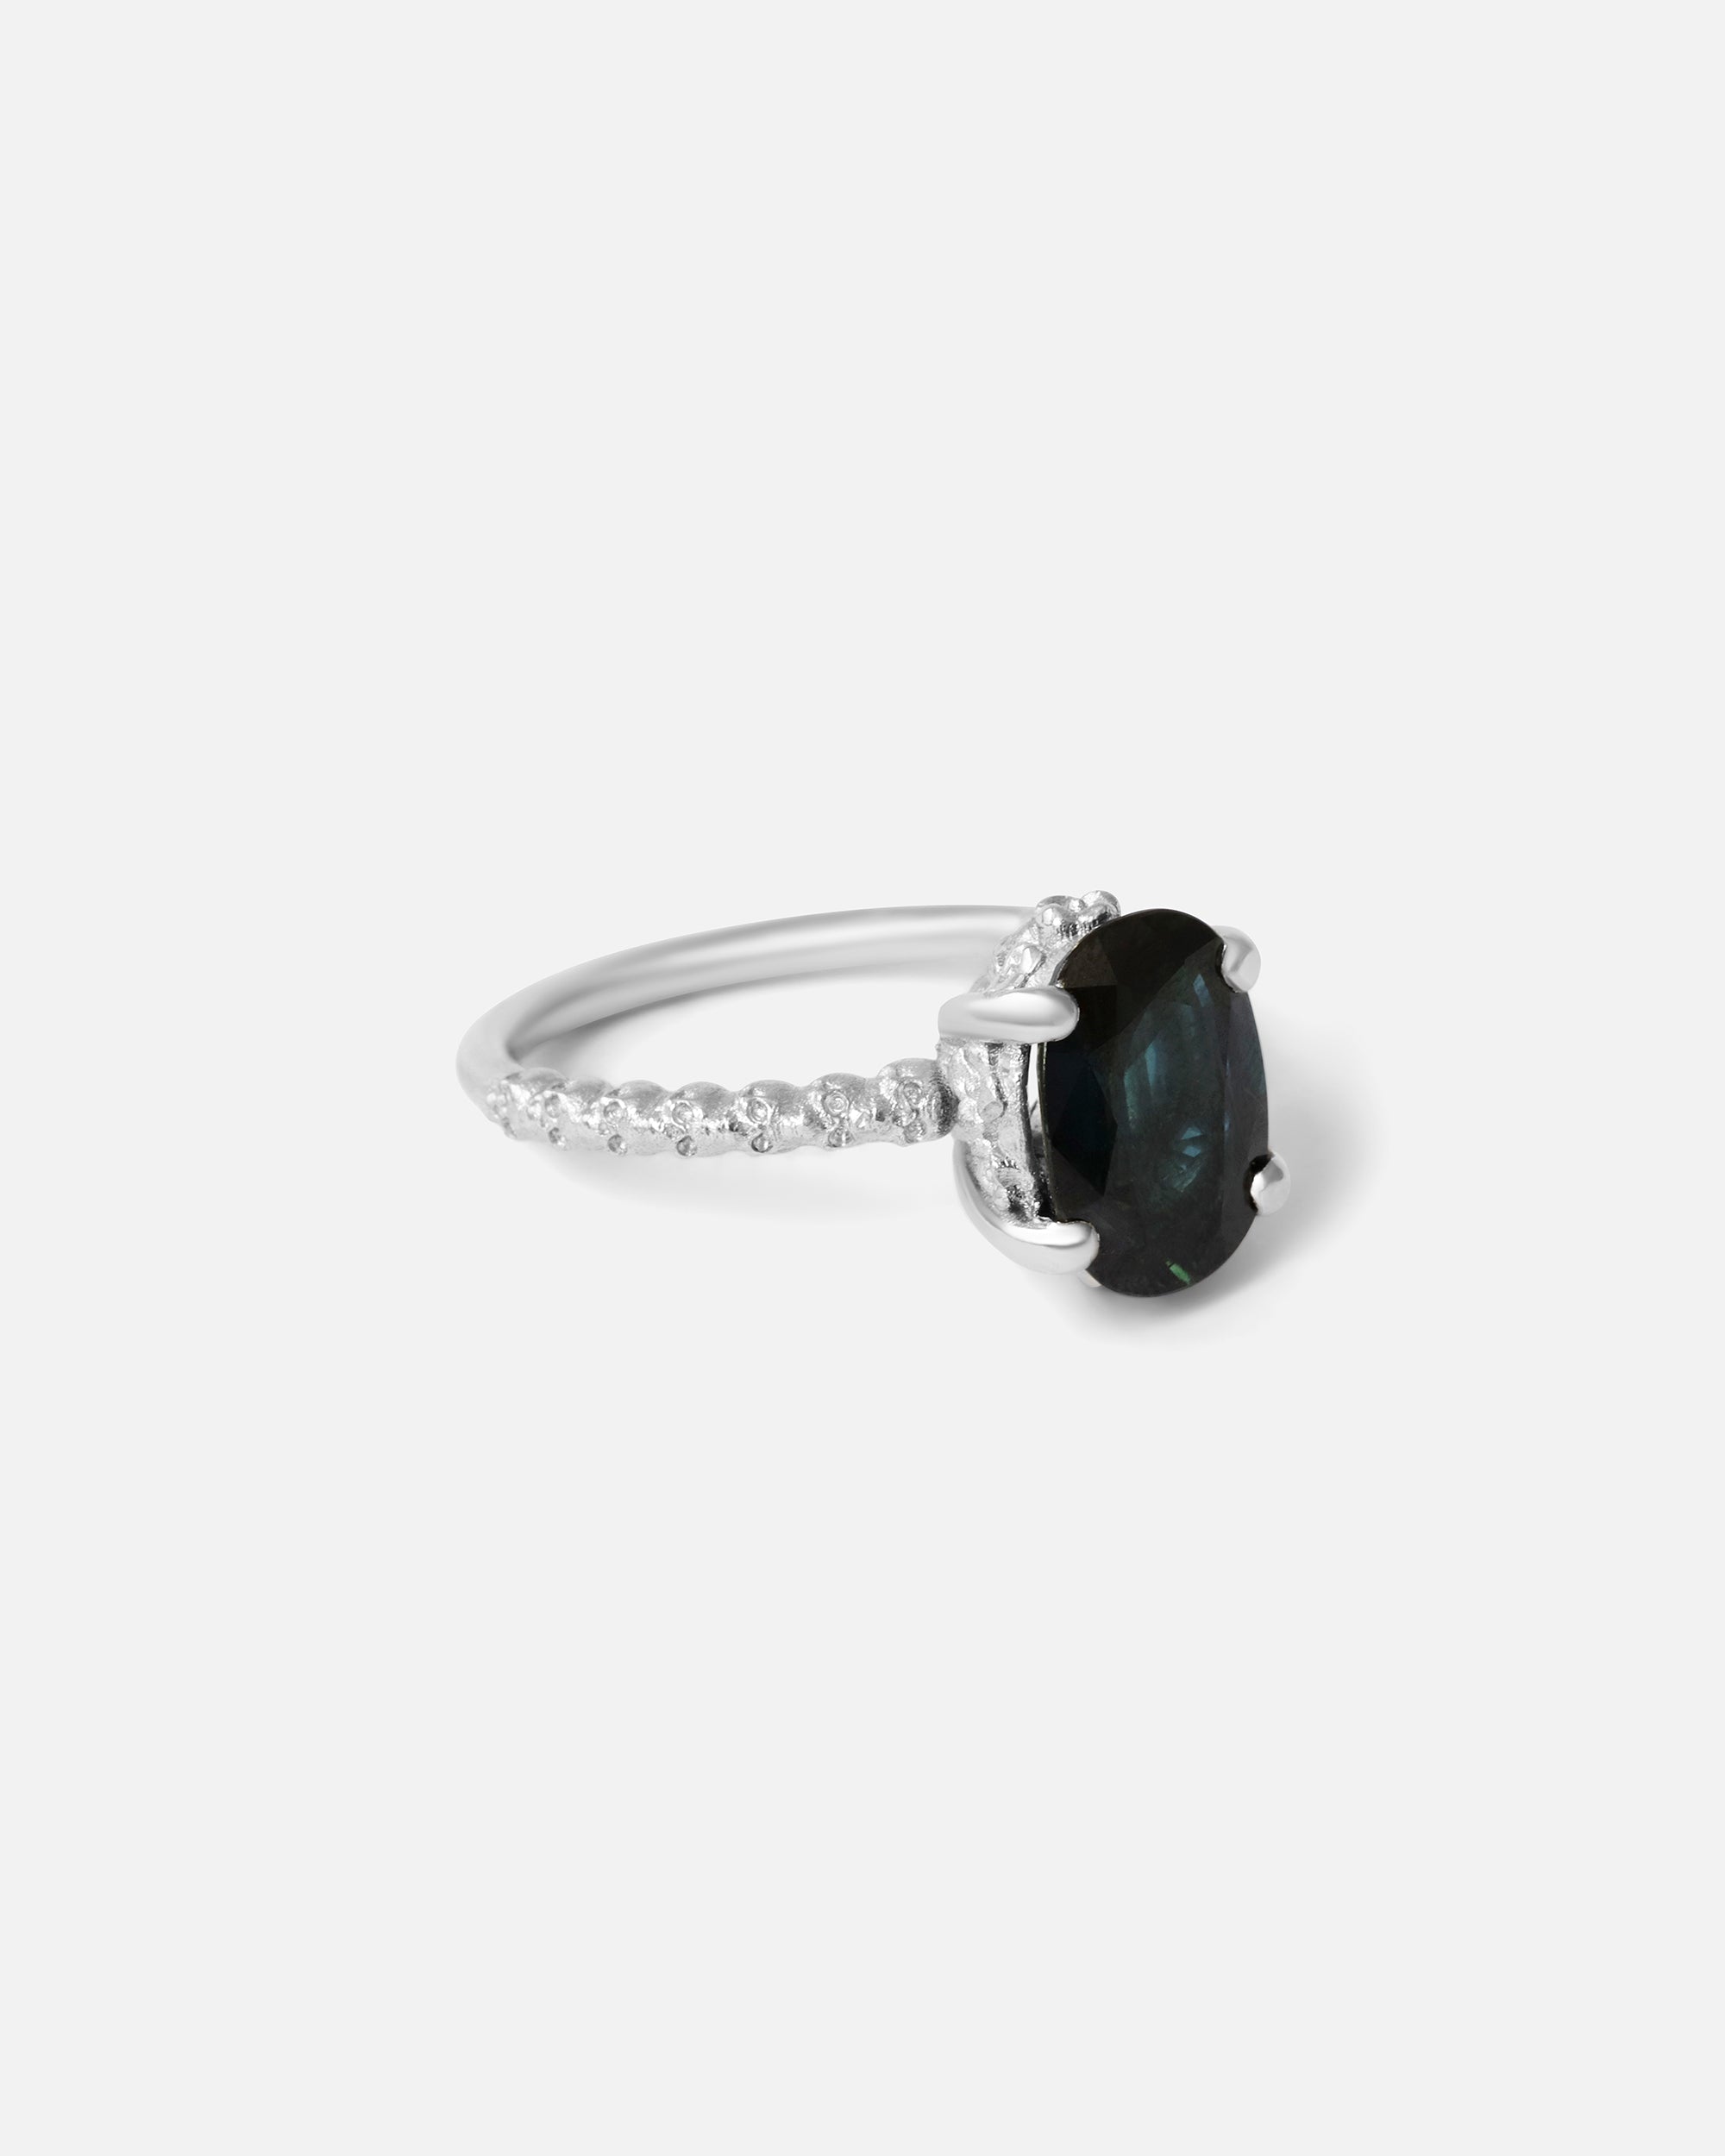 Oval Sapphire / Ring By fitzgerald jewelry